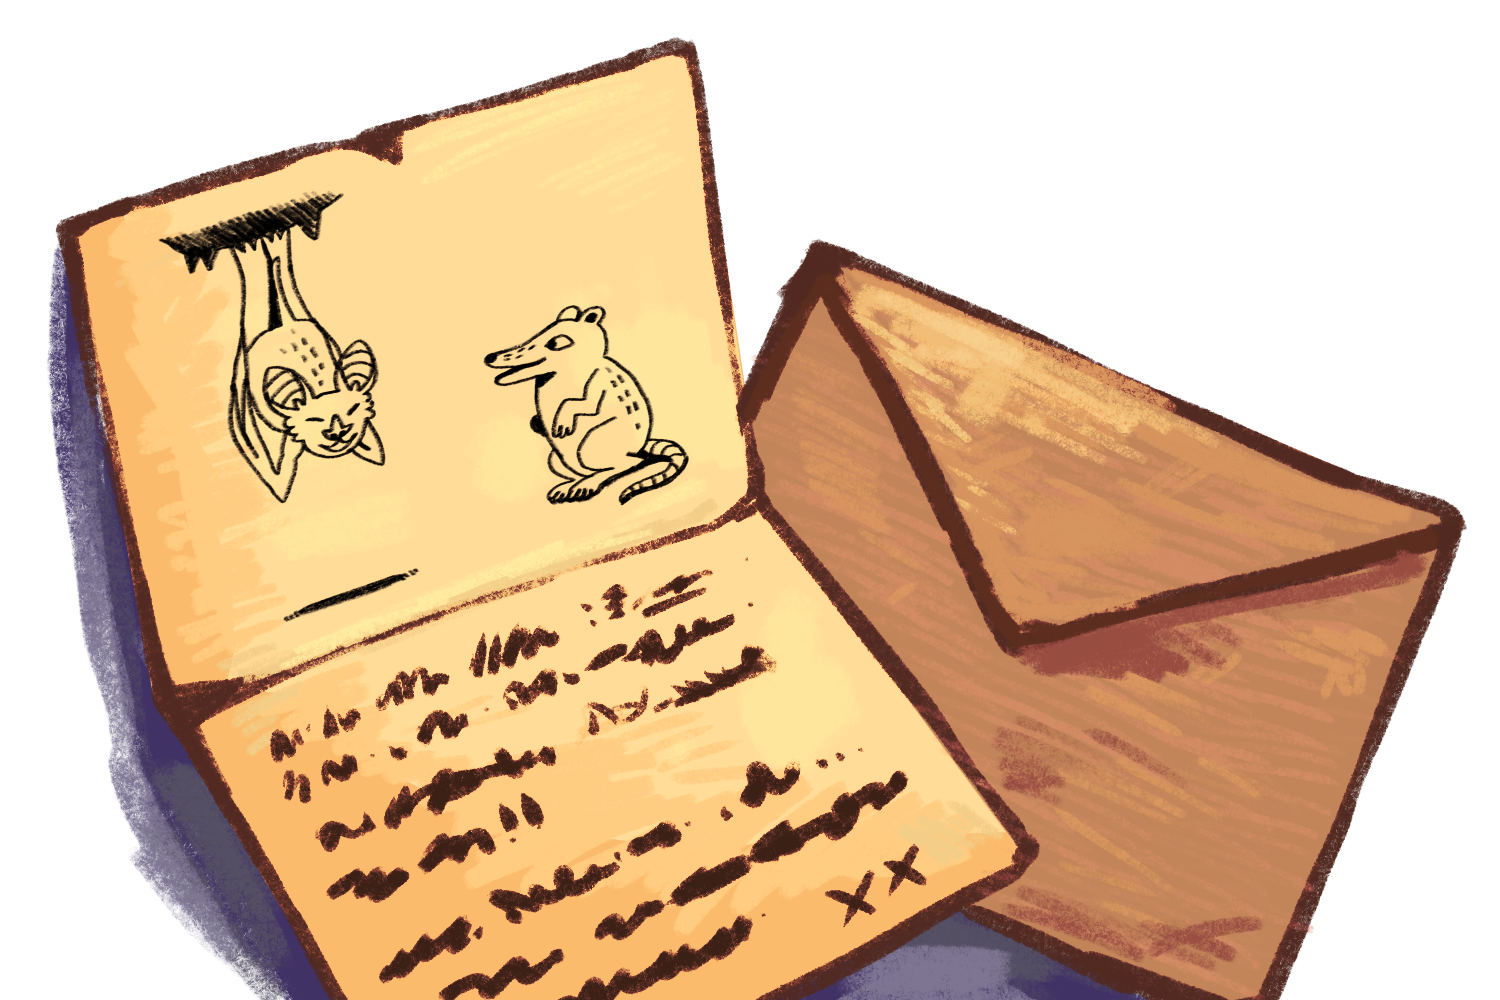 Image. A drawing of an open letter laid on a closed envelope. The letter has an illustration of a a bat hanging upside down, laughing with a shrew.